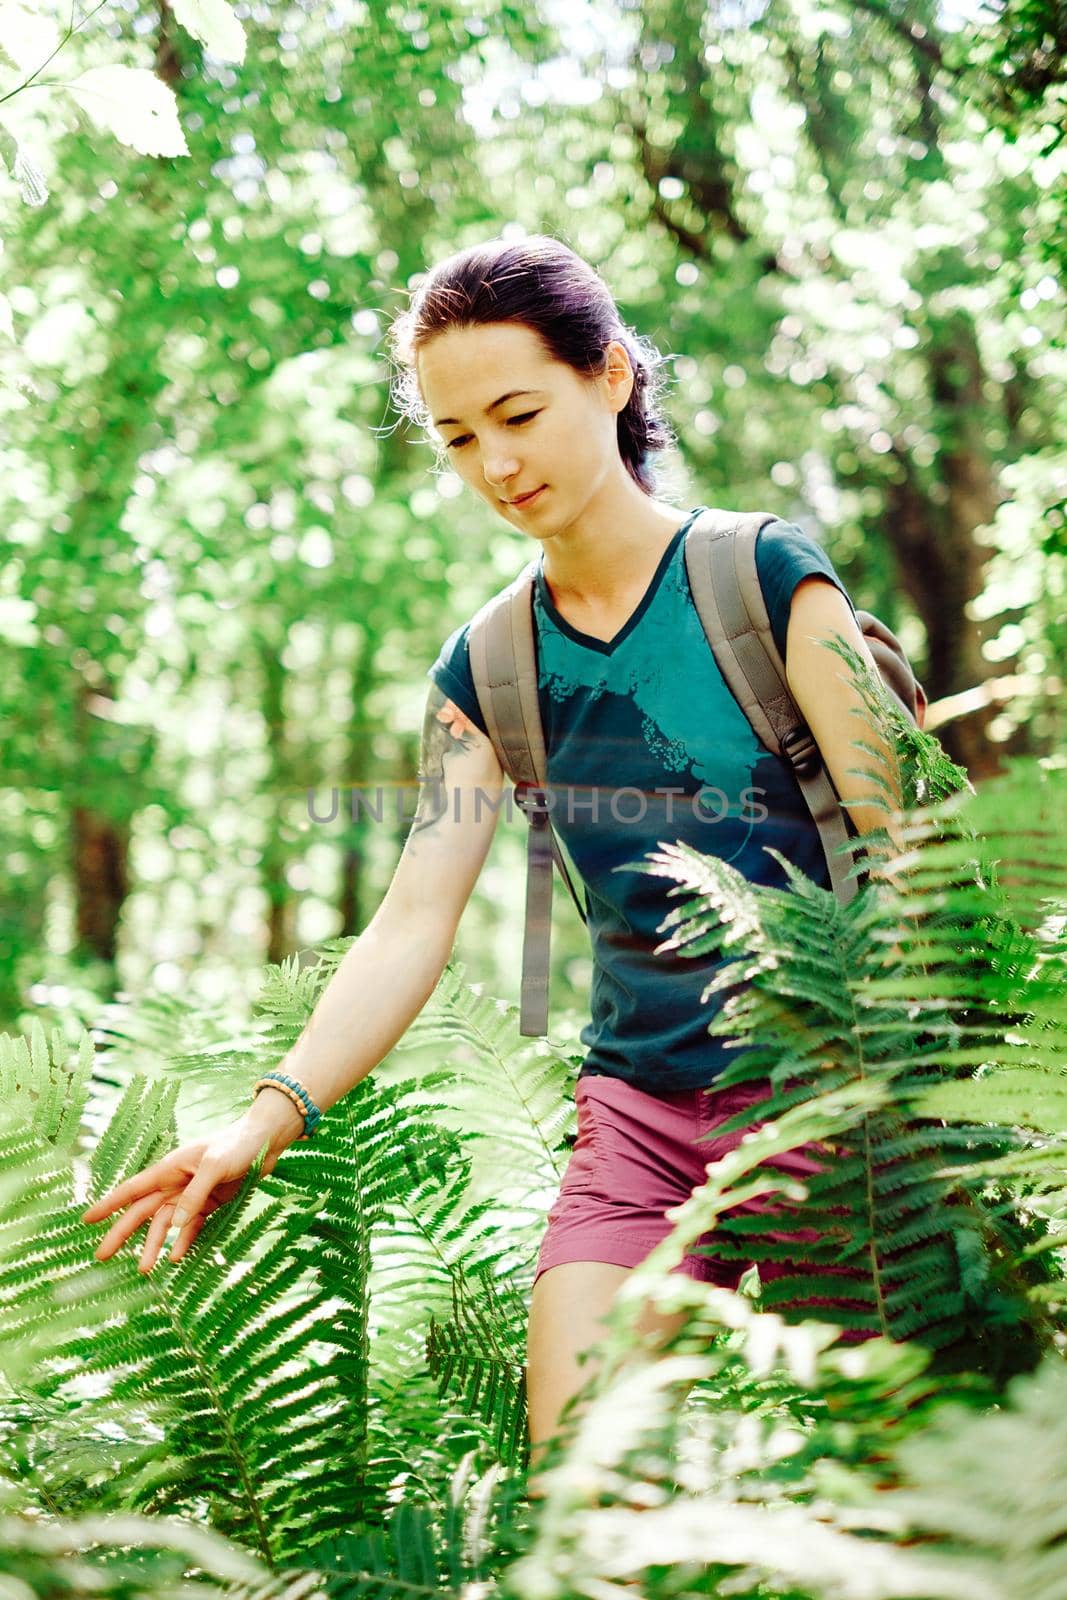 Explorer girl with backpack walking among bushes in summer forest.